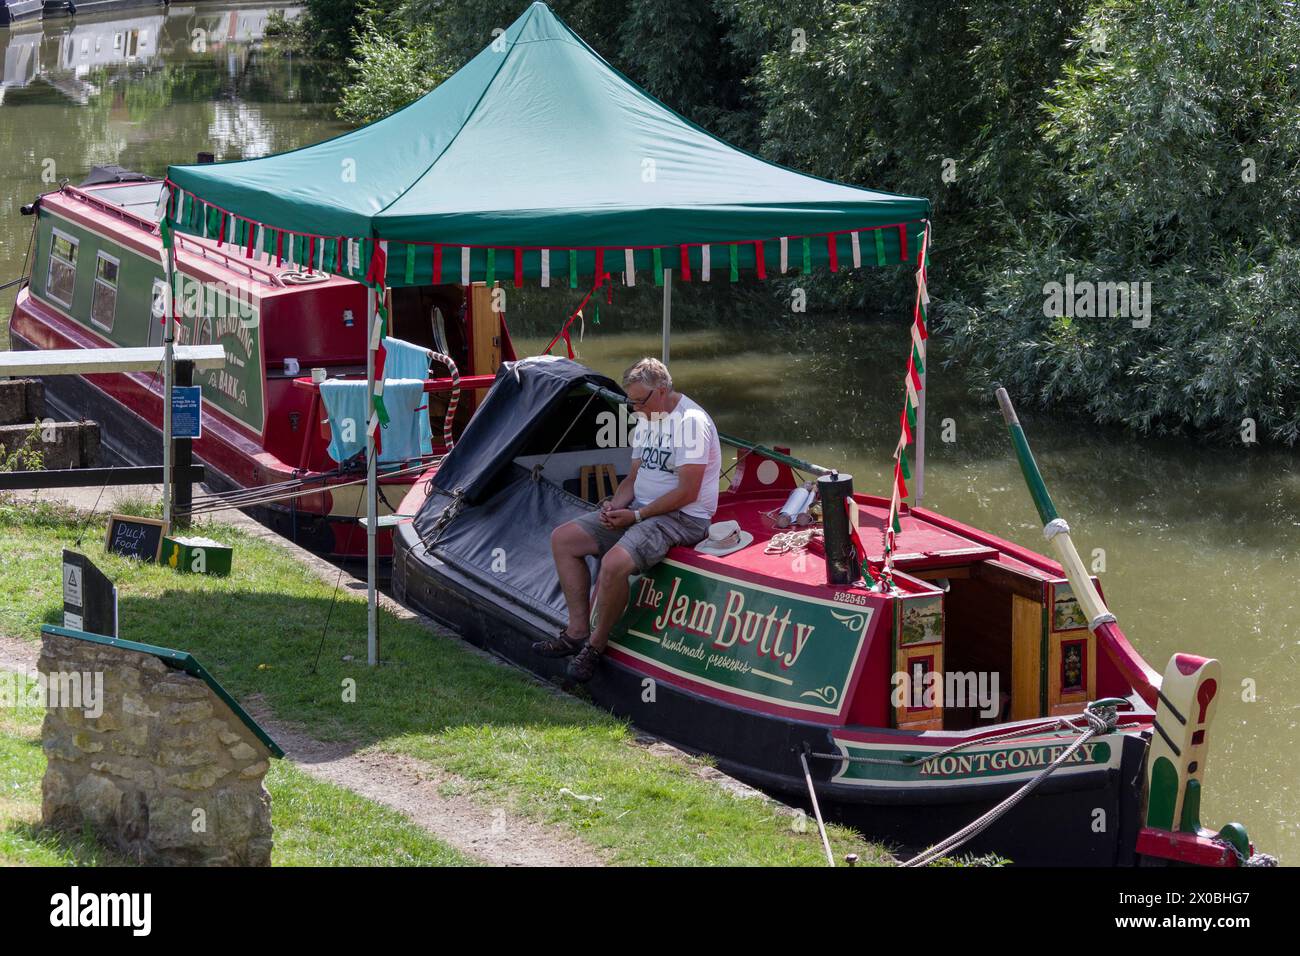 The Jam Butty, a narrowboat selling home made preserves, on the Grand Union canal at the Blisworth Canal festival, Northamptonshire, UK Stock Photo